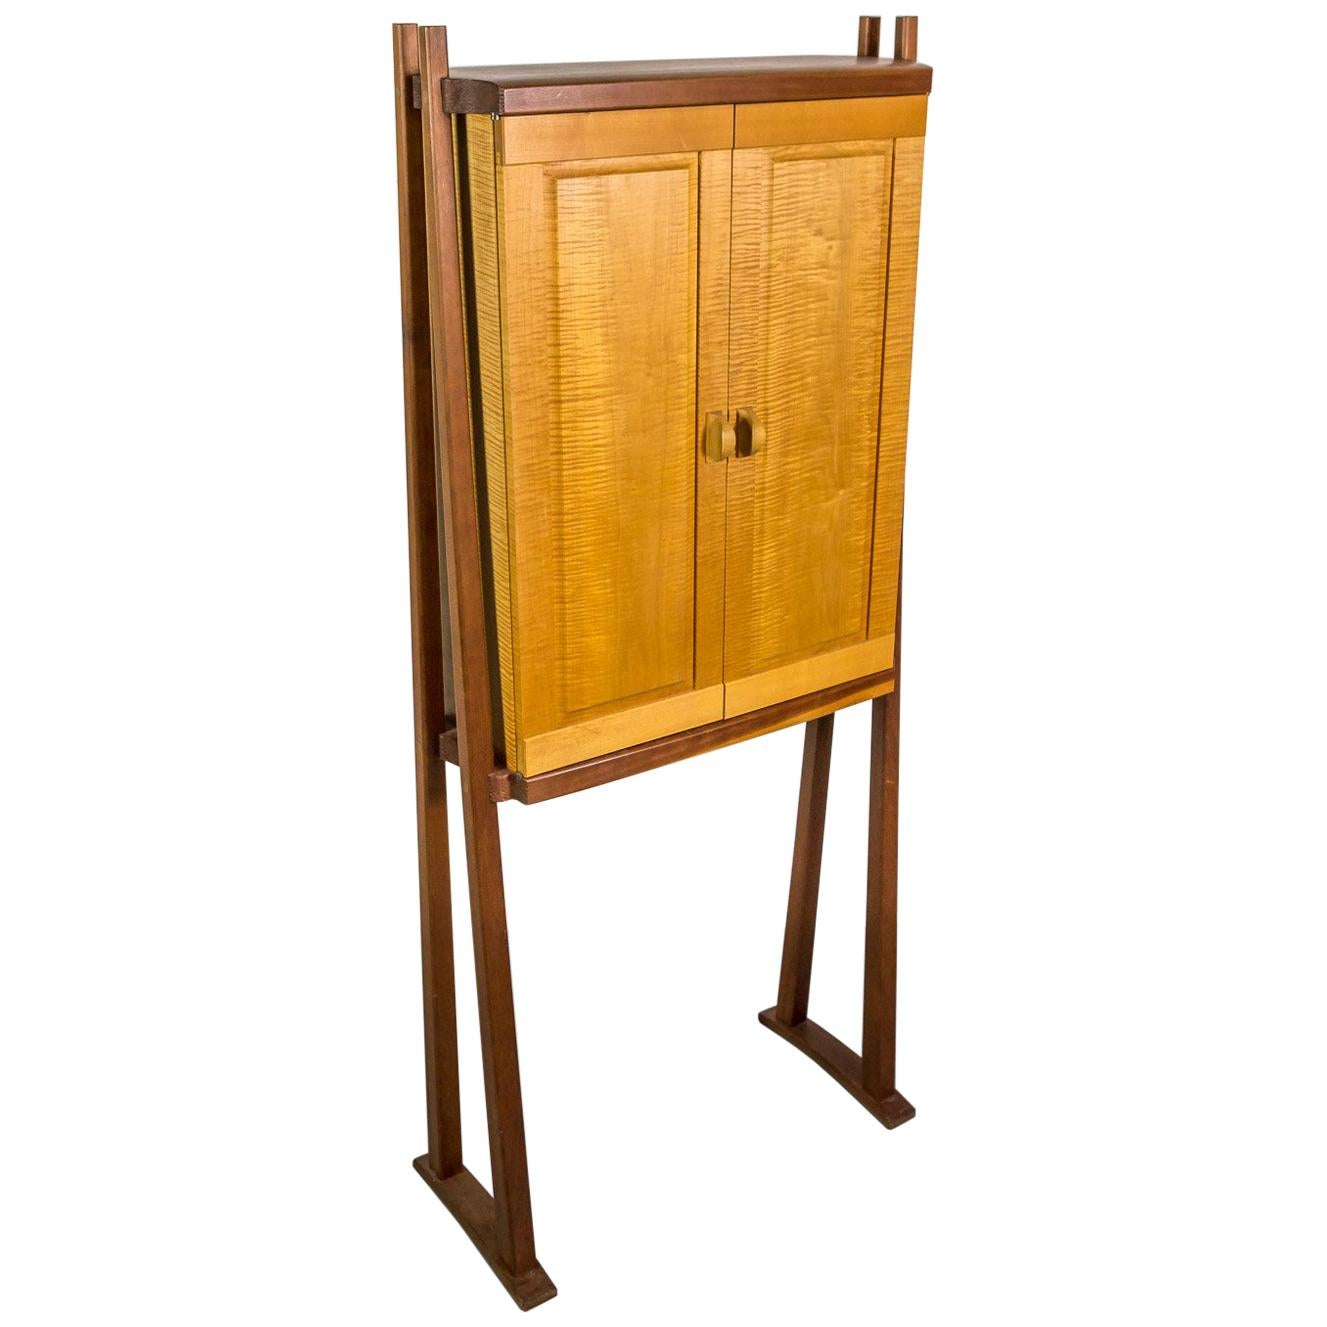 Studio Cabinet in Wood by American Craftsman Mike Bartell For Sale